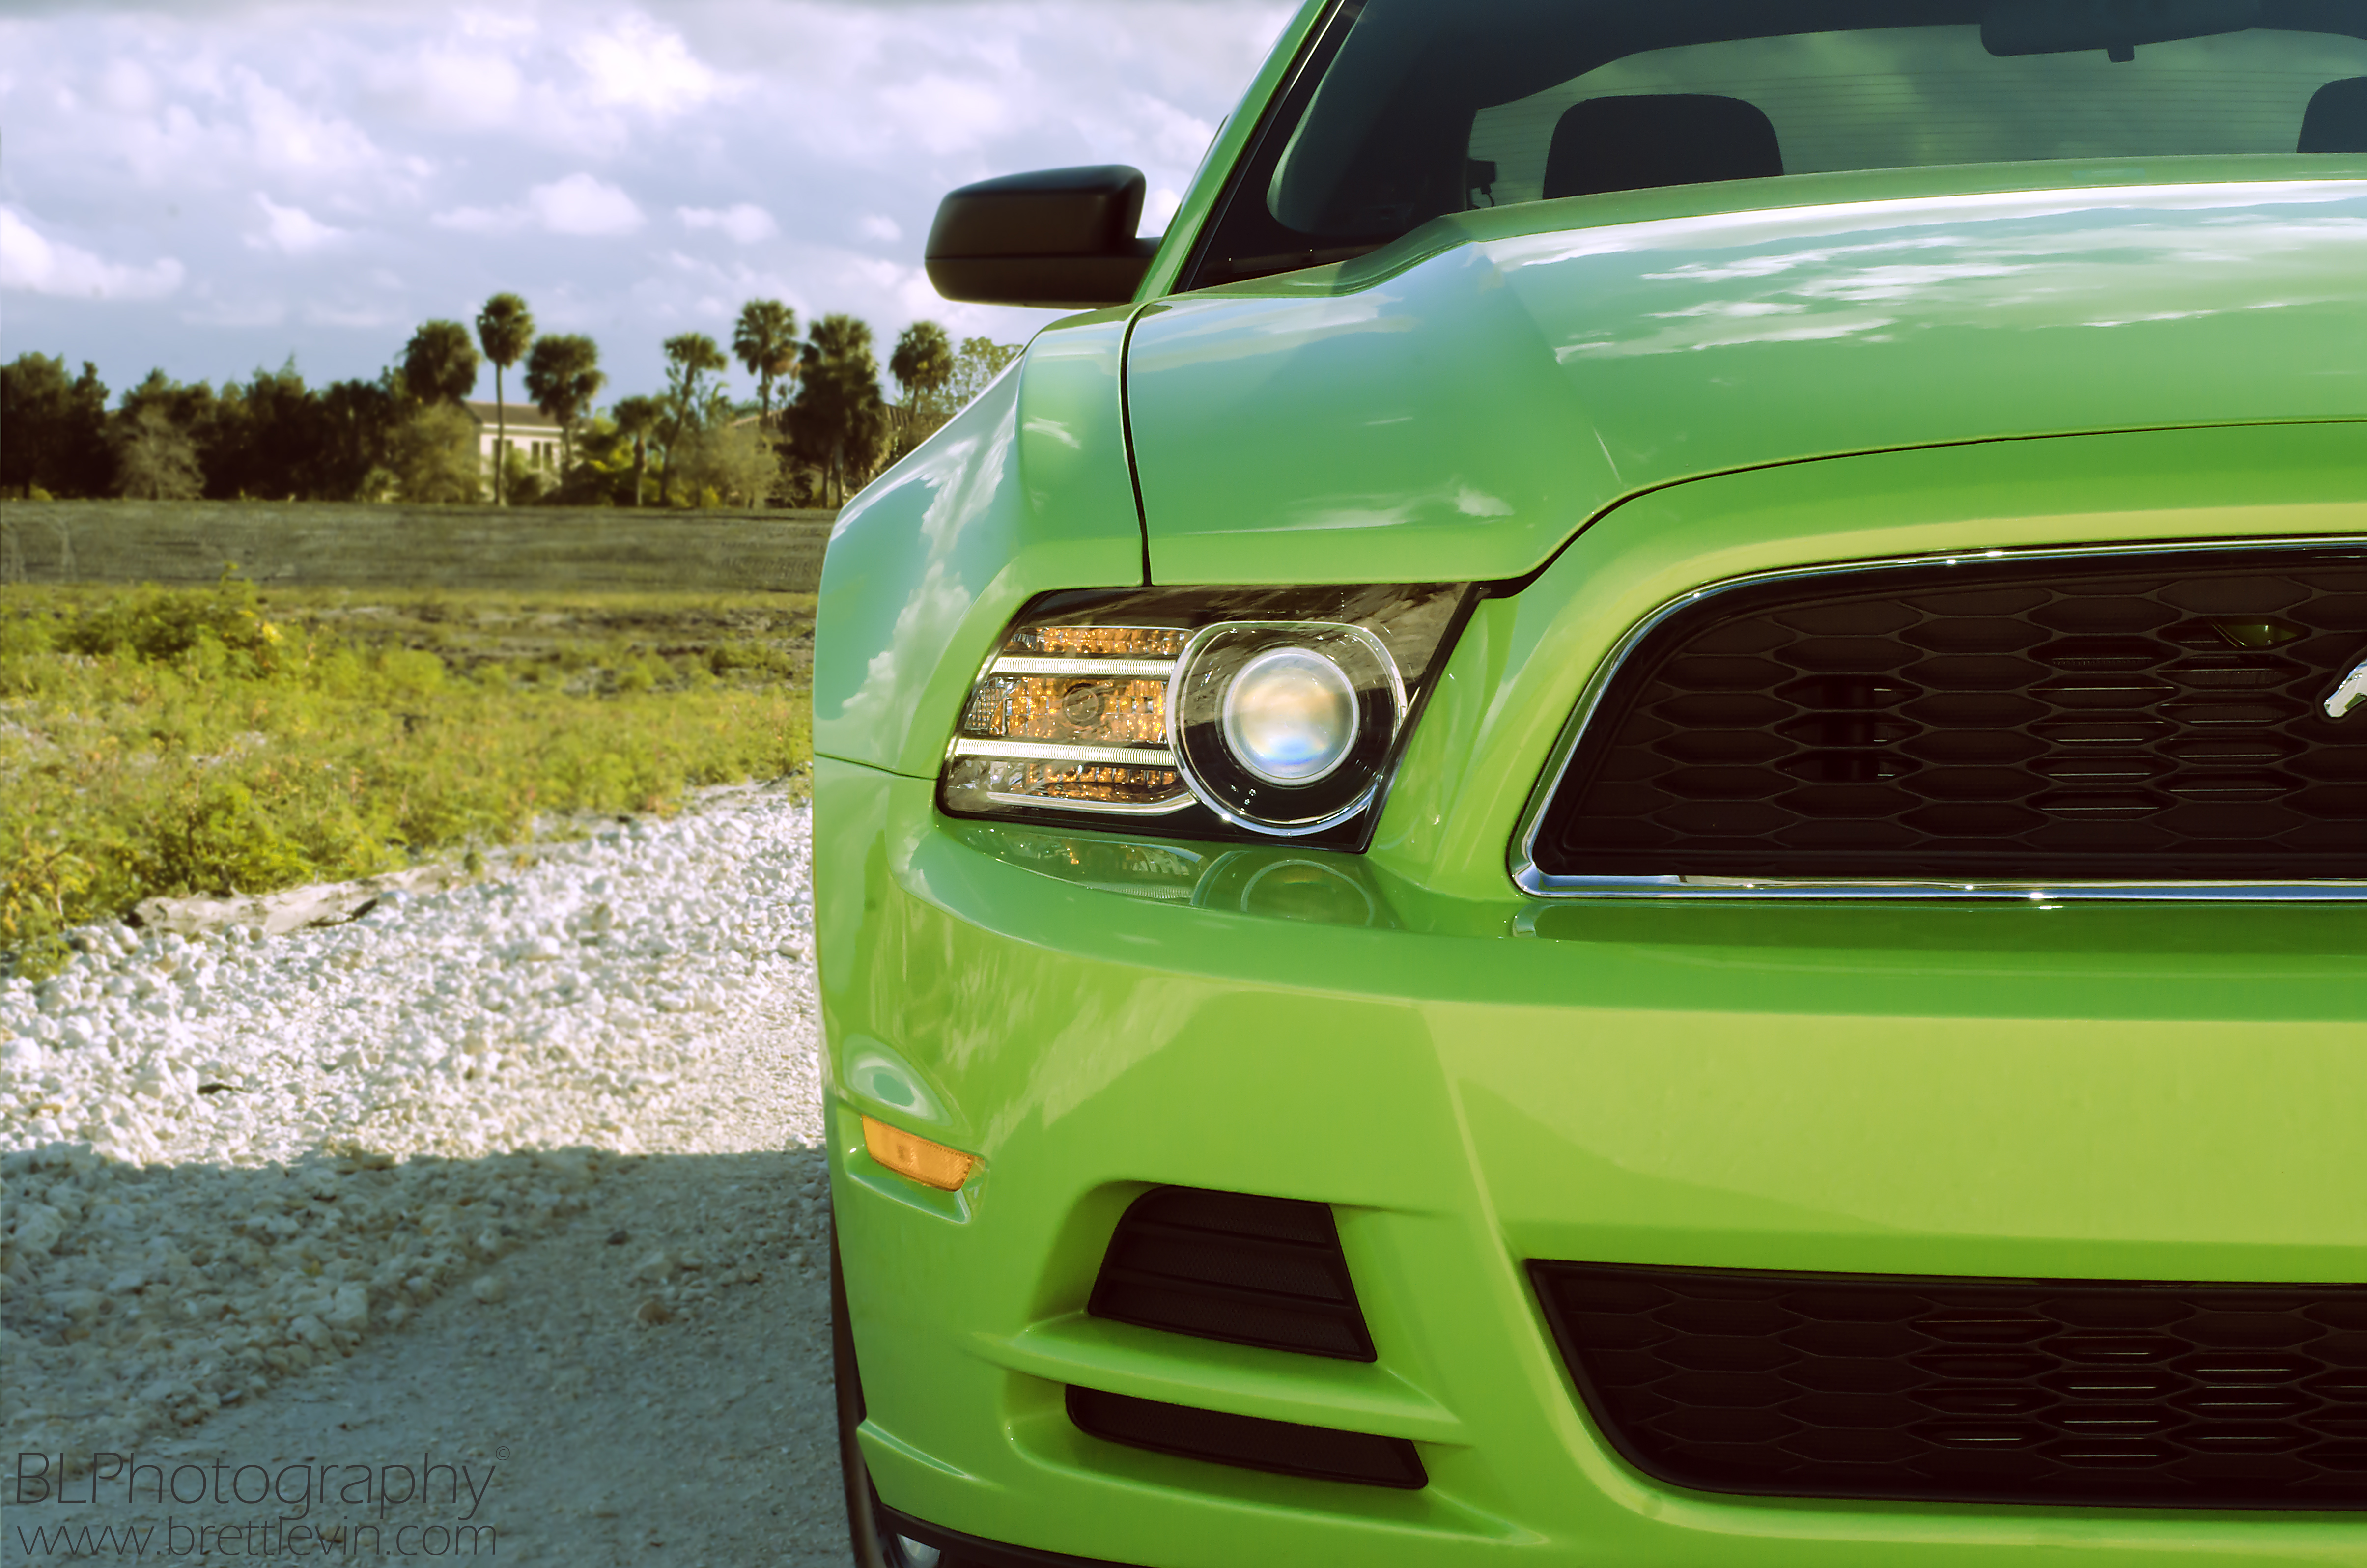 ford mustang, sports, cars, green, front view, sports car, headlight